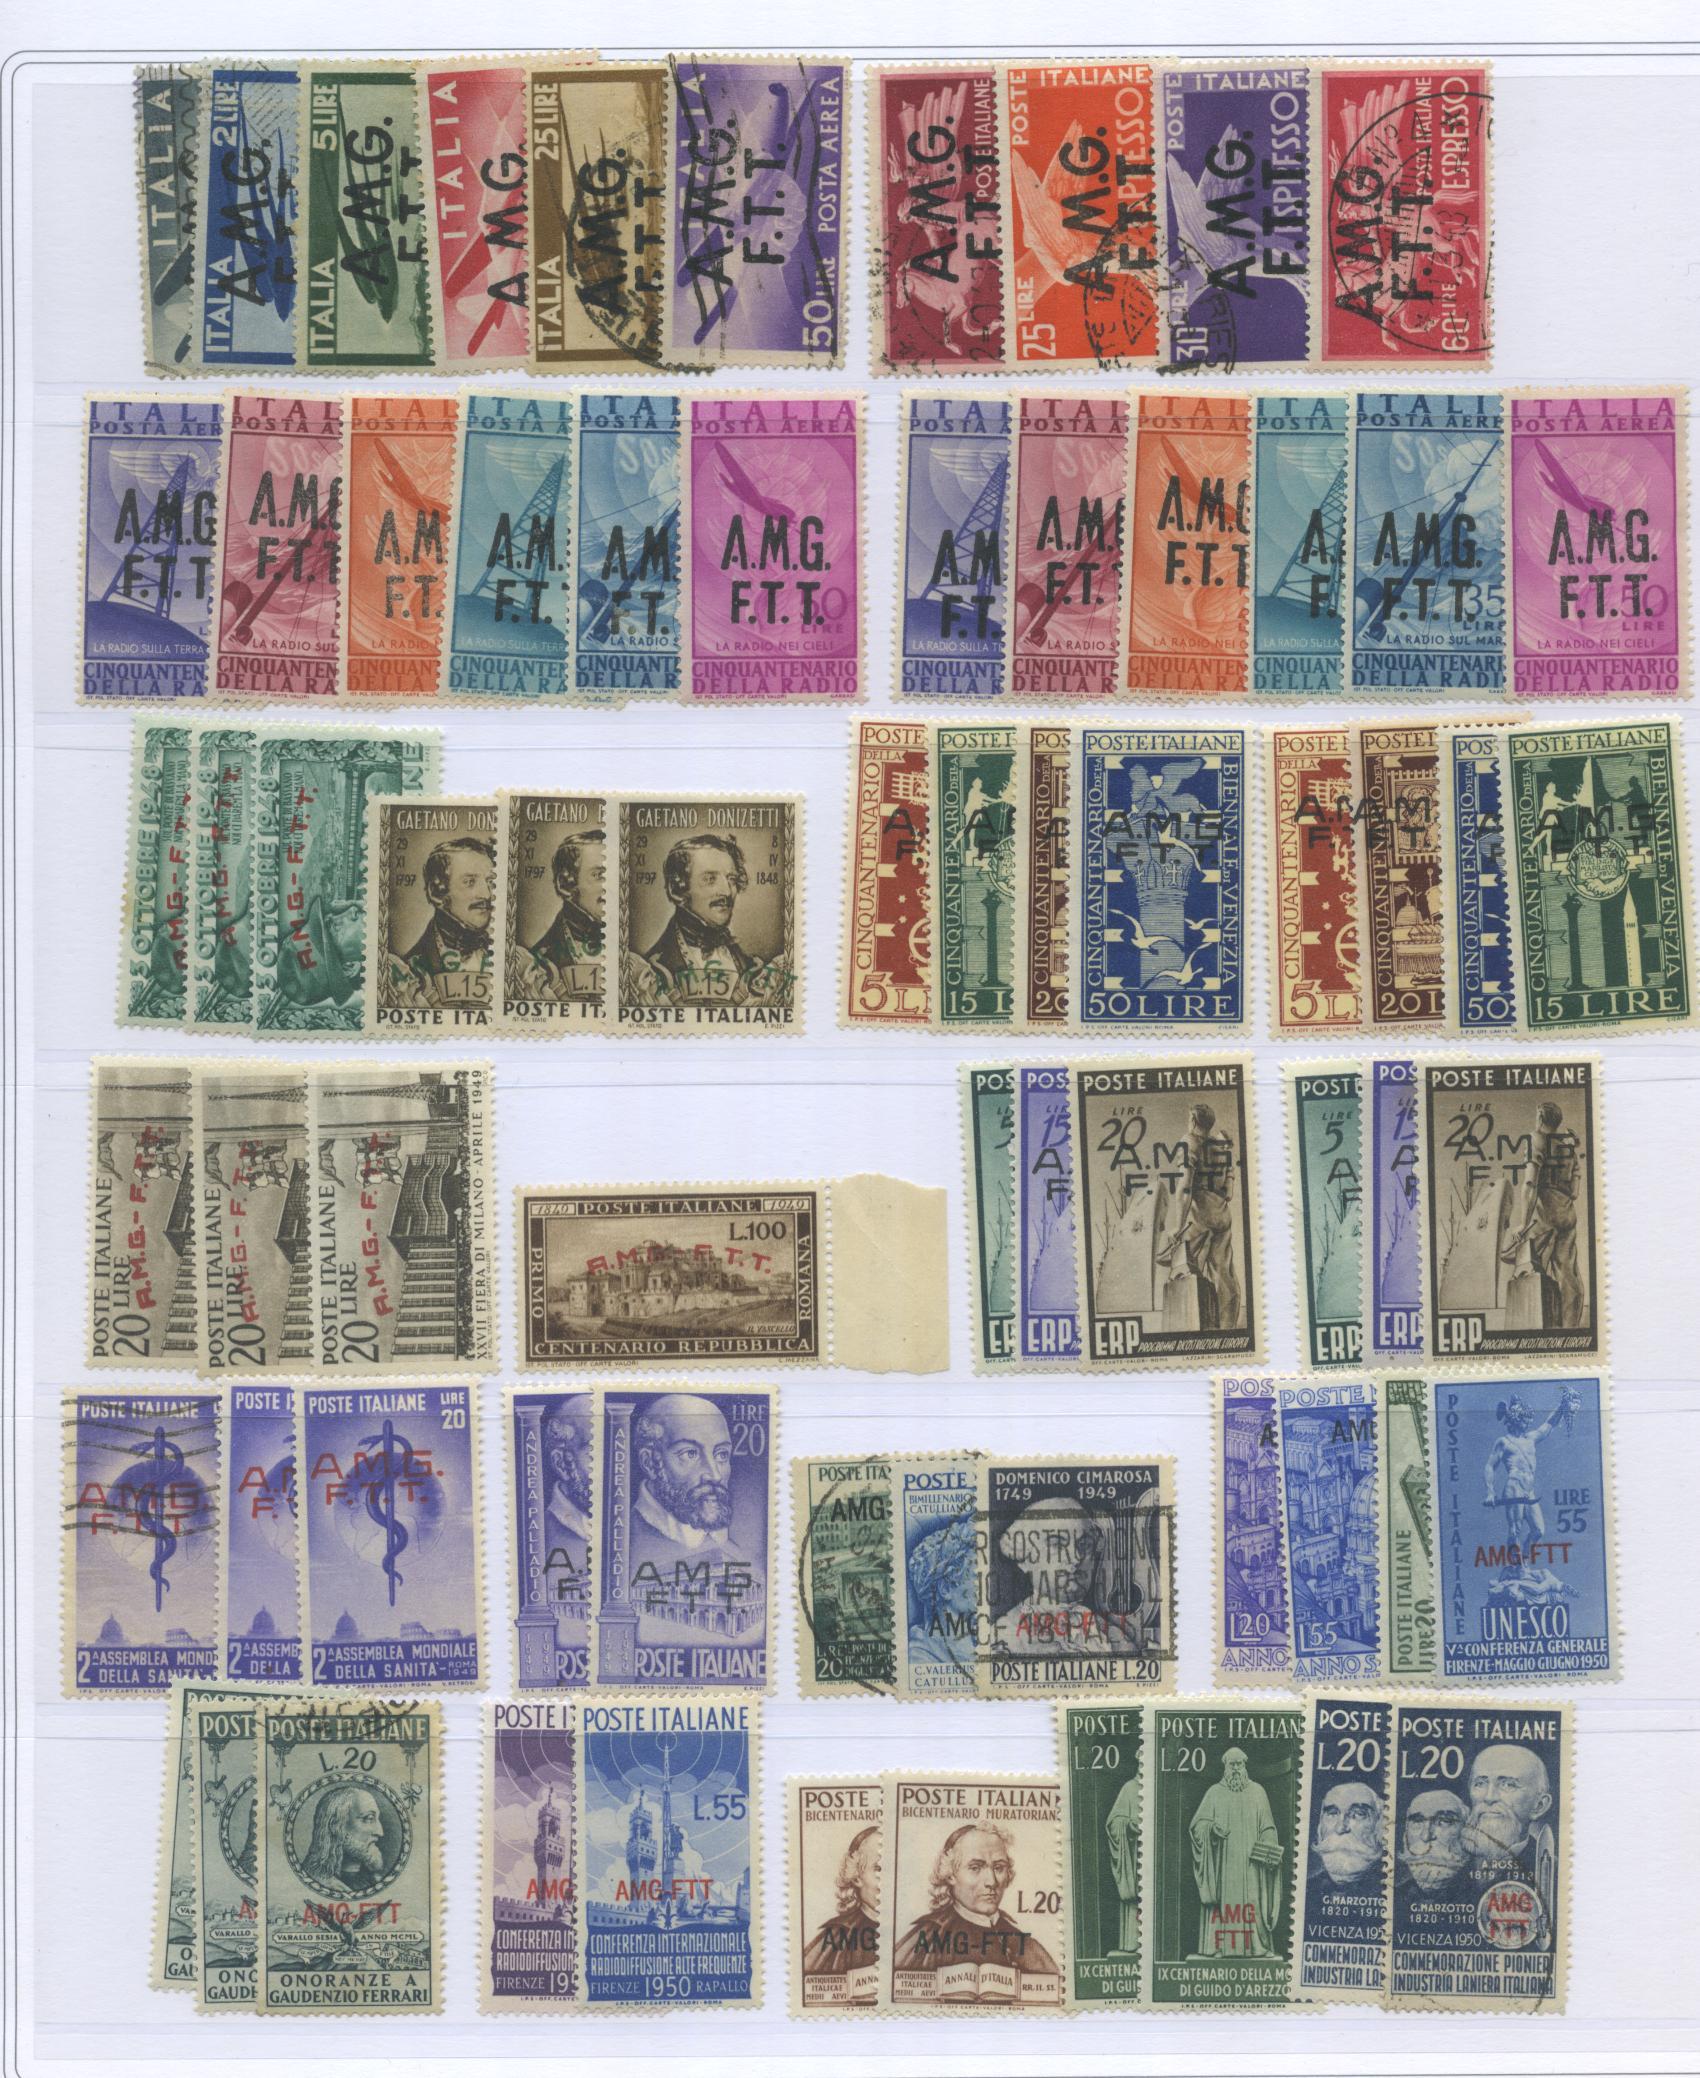 Scansione lotto: TRIESTE 1949/54 LOTTO SERIE CPL. N.2 */US